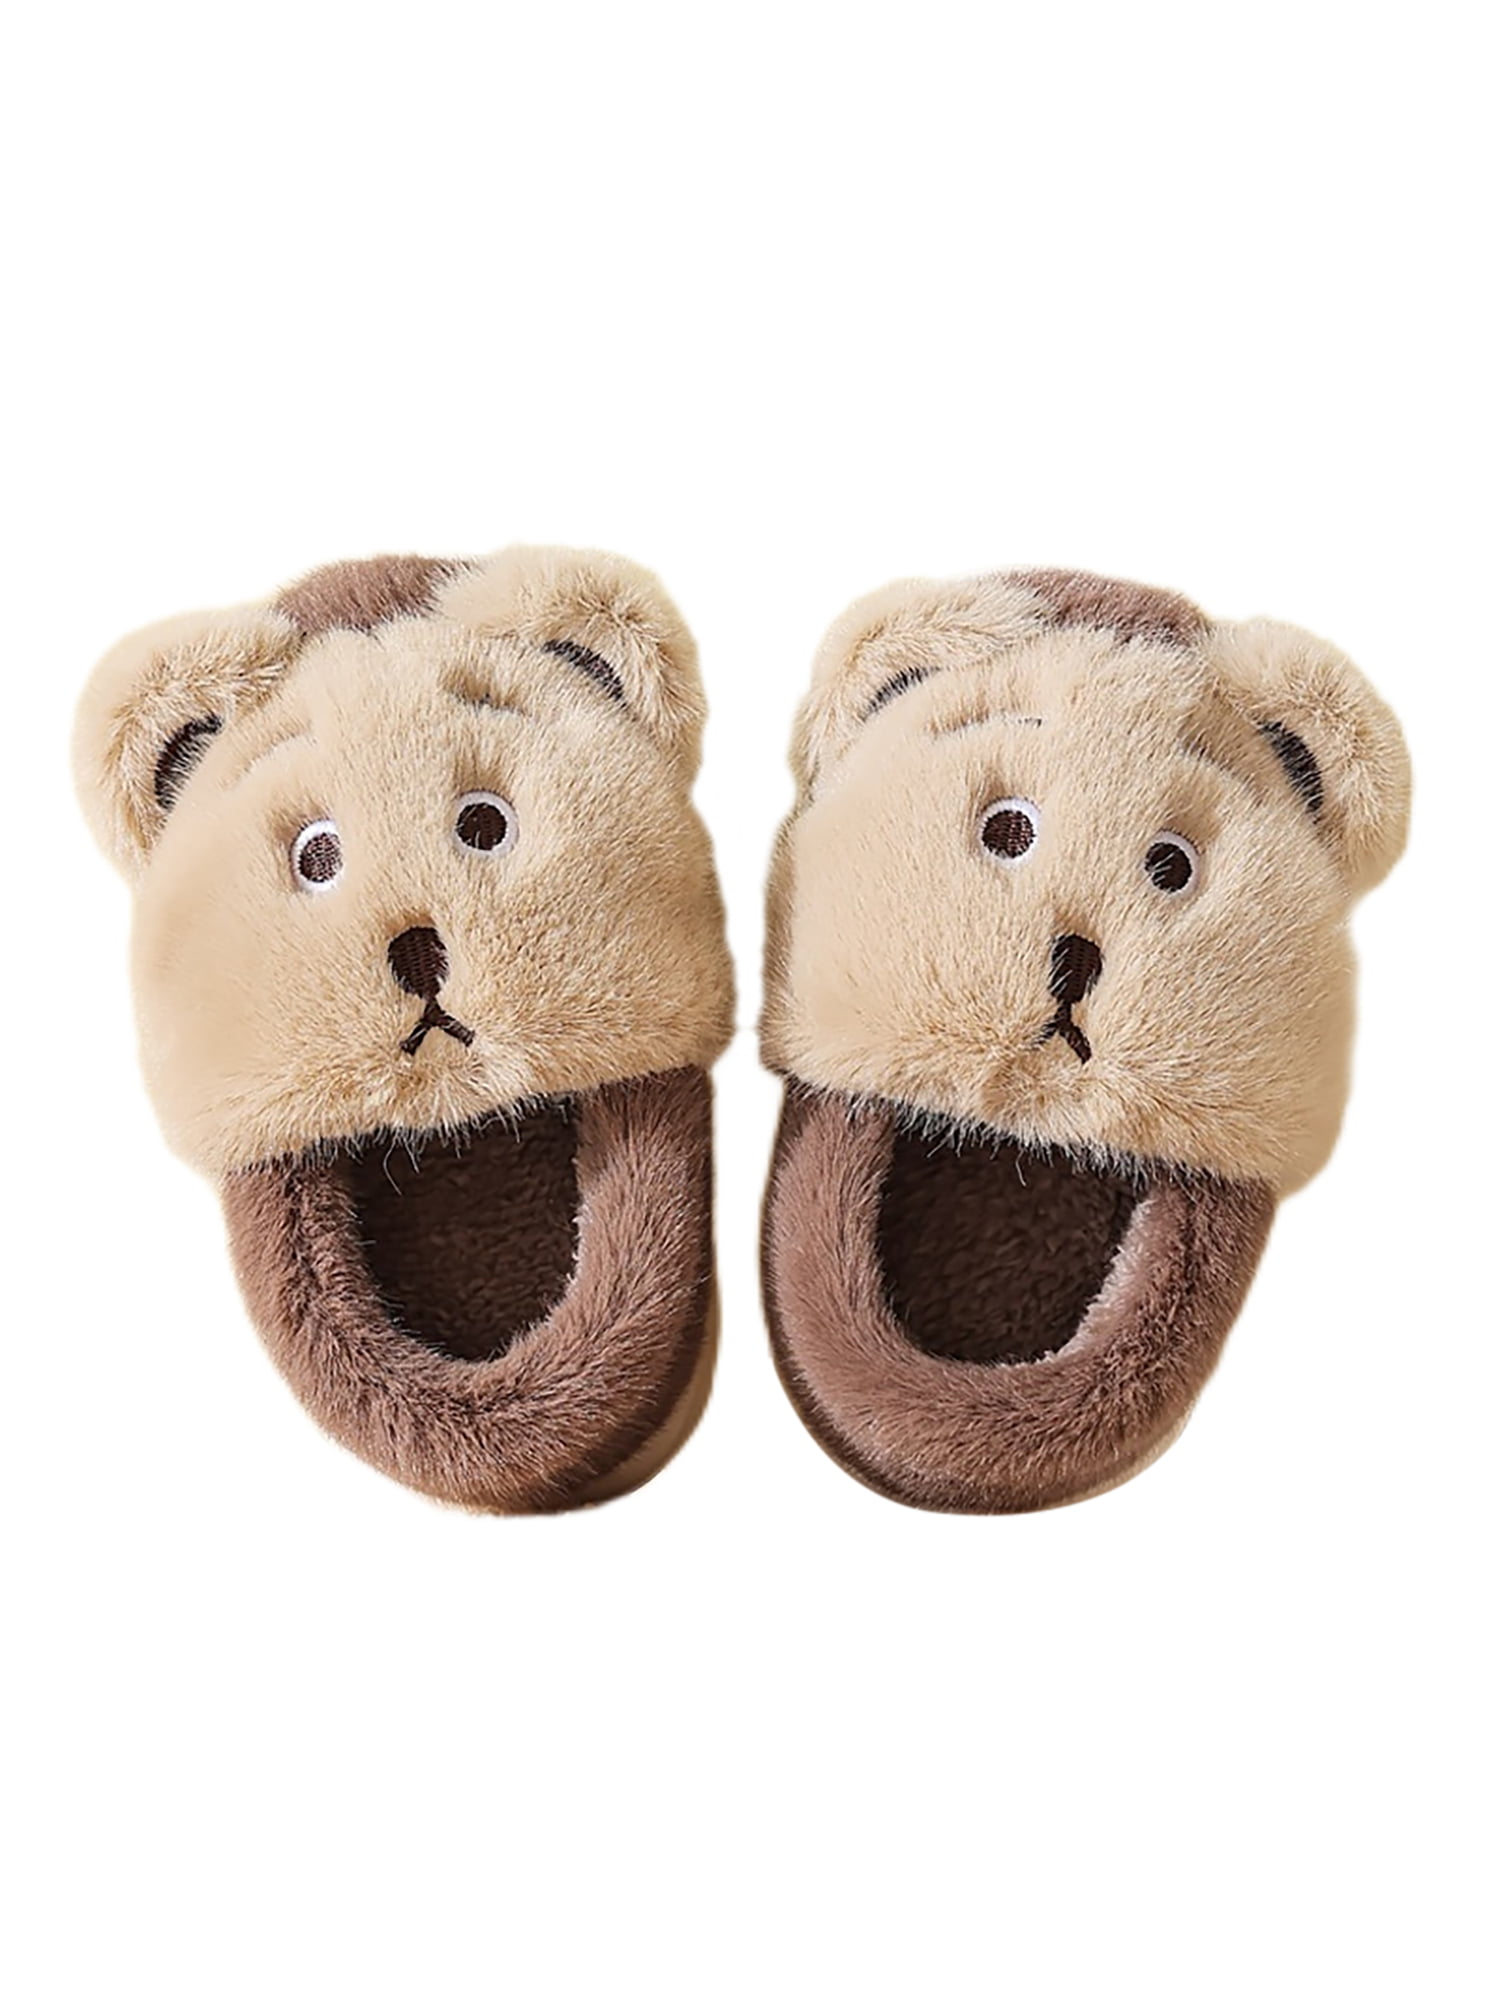 Lacyhop Children Animal Slippers Plush Lining Fuzzy Slipper Cartoon Winter  House Shoes Home Comfort Warm Indoor Shoe Soft Slip On Fluffy Slides Coffee   